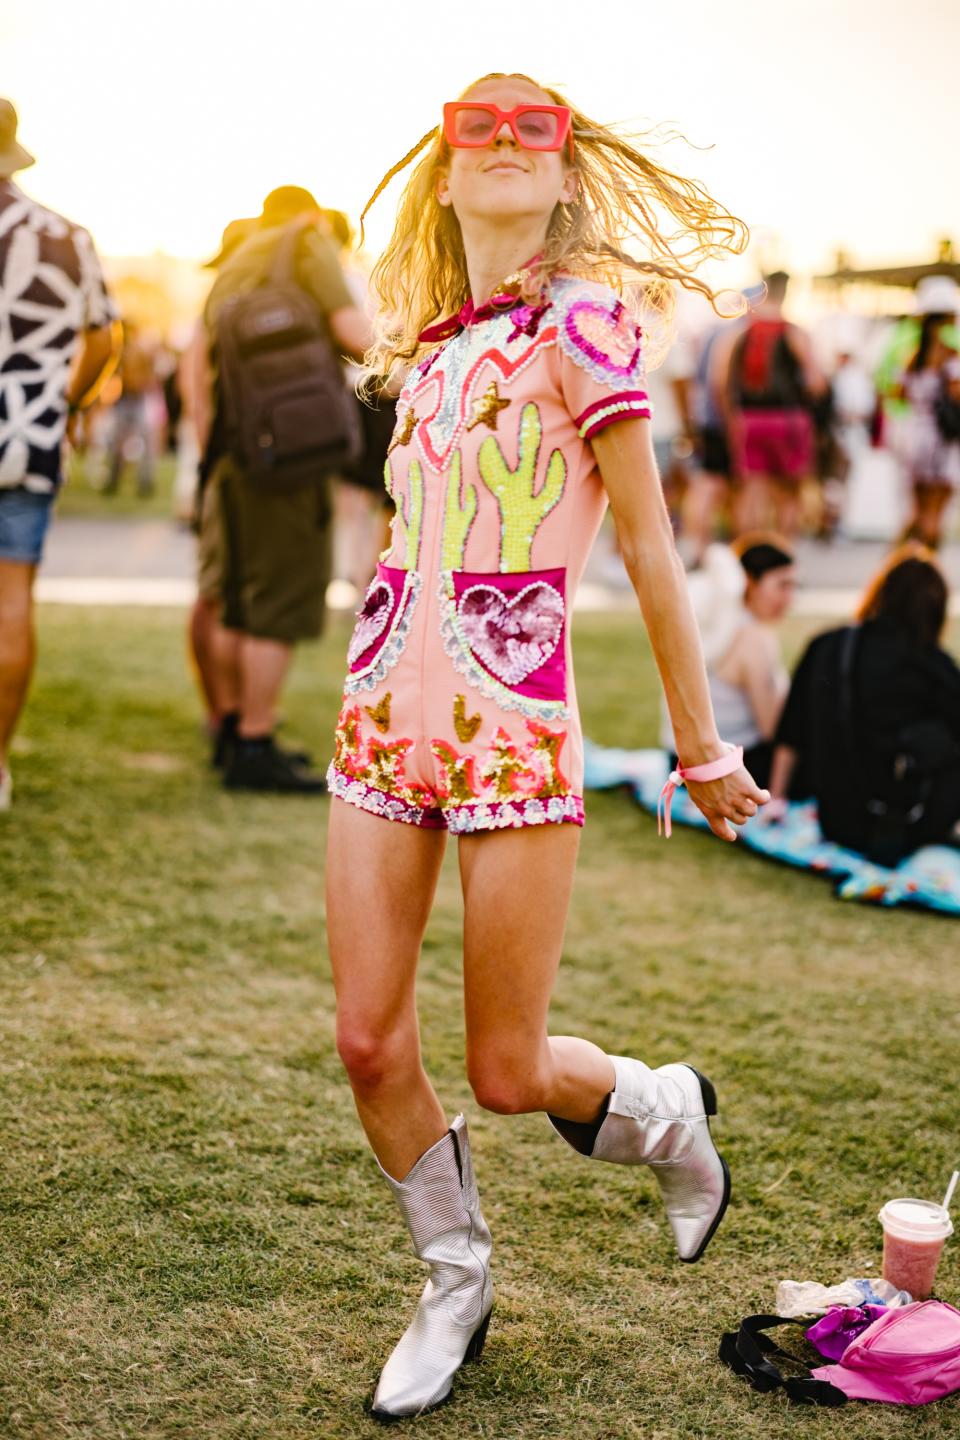 Festivalgoers are seen during the 2023 Coachella Valley Music and Arts Festival on April 22, 2023 in Indio, California.